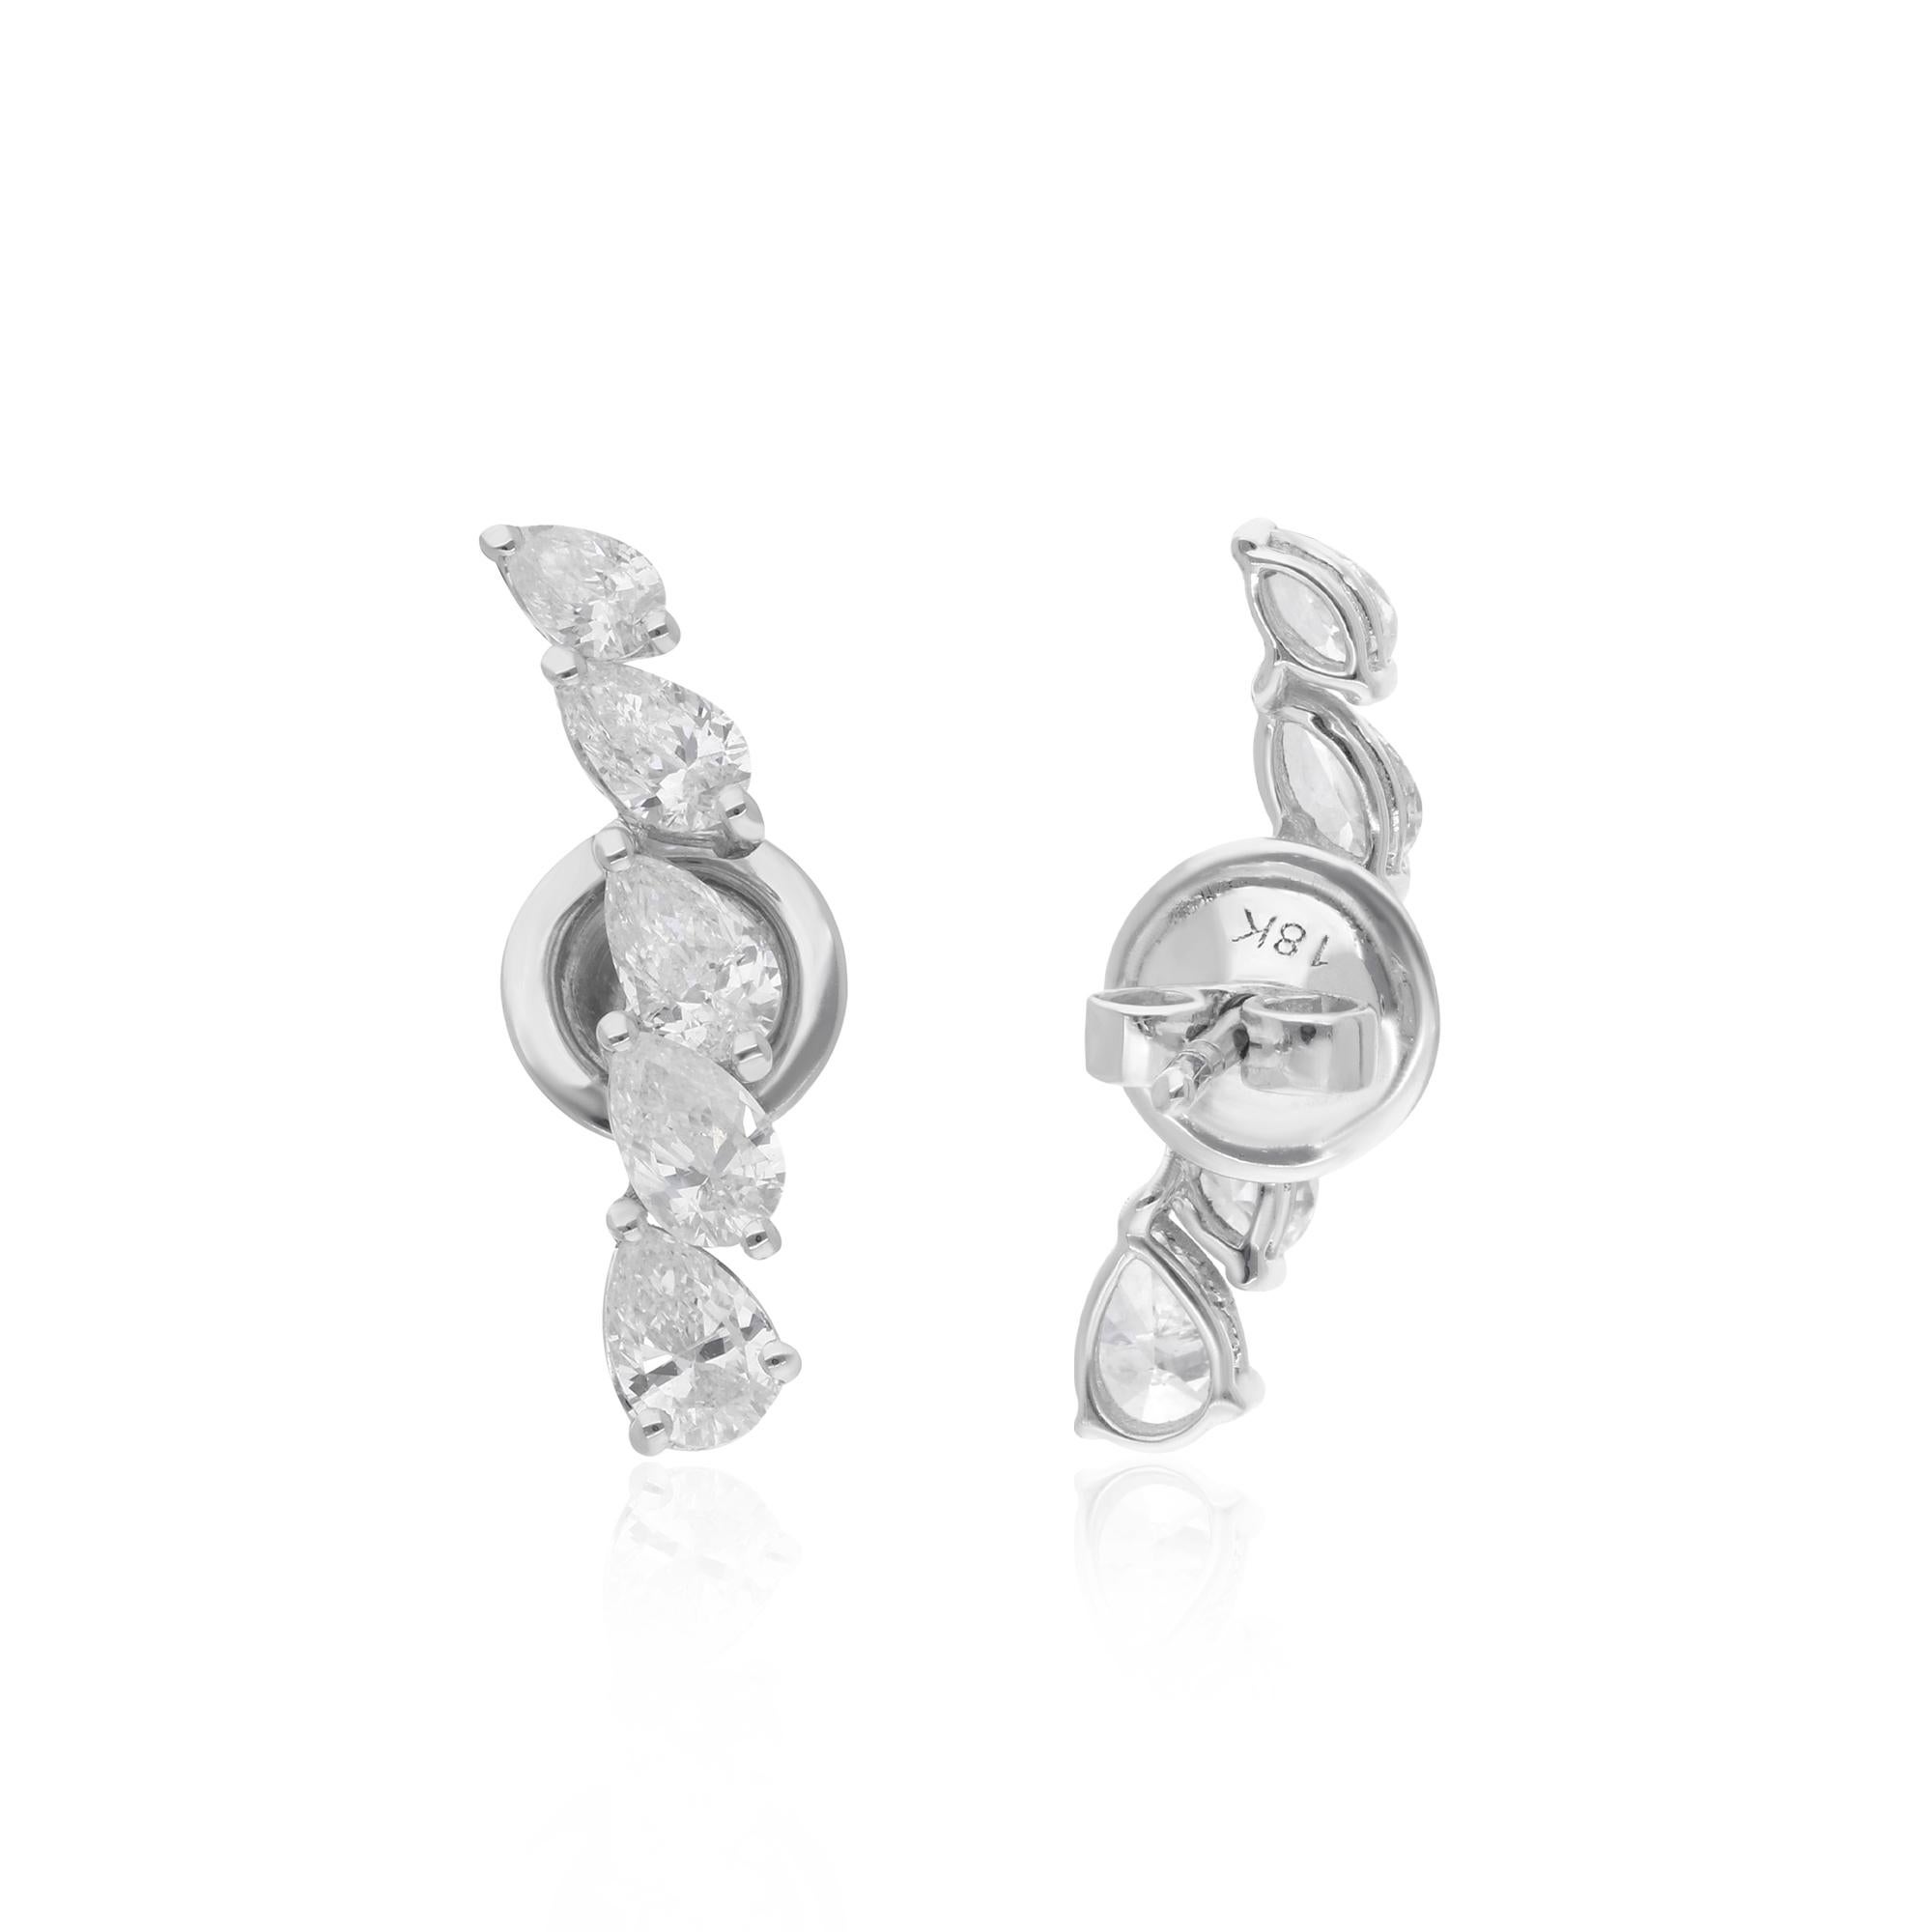 At the heart of each stud earring gleams a genuine pear-shaped diamond, totaling 1.58 carats. Each diamond is hand-selected for its exceptional quality, brilliance, and fire, ensuring that every facet sparkles with unparalleled beauty. The pear